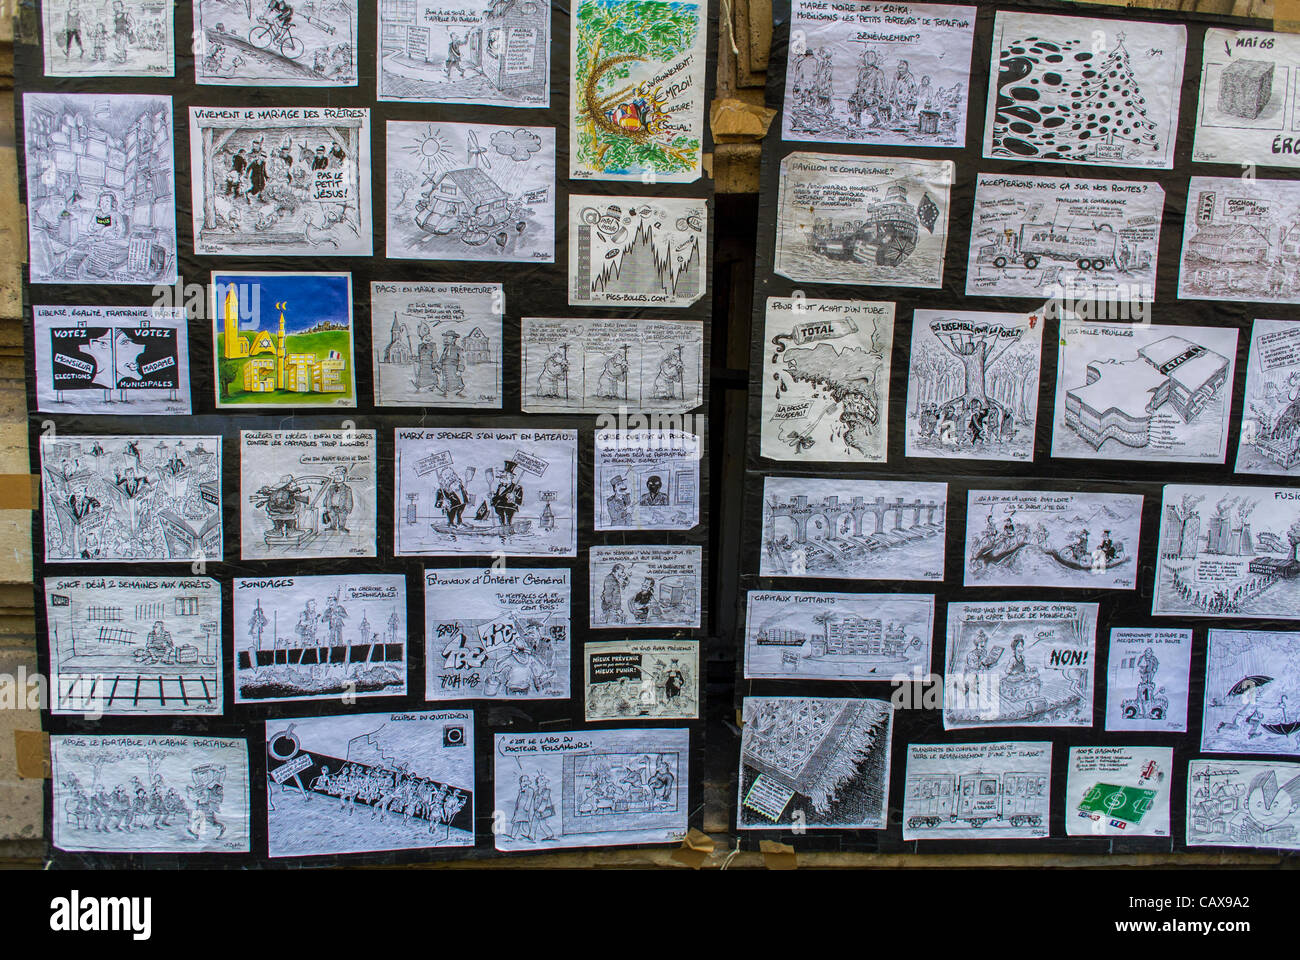 Paris, France, French Political Cartoons on Display on Wall on Street during  Trade Unions Demonstration May Day Events, protest art Stock Photo